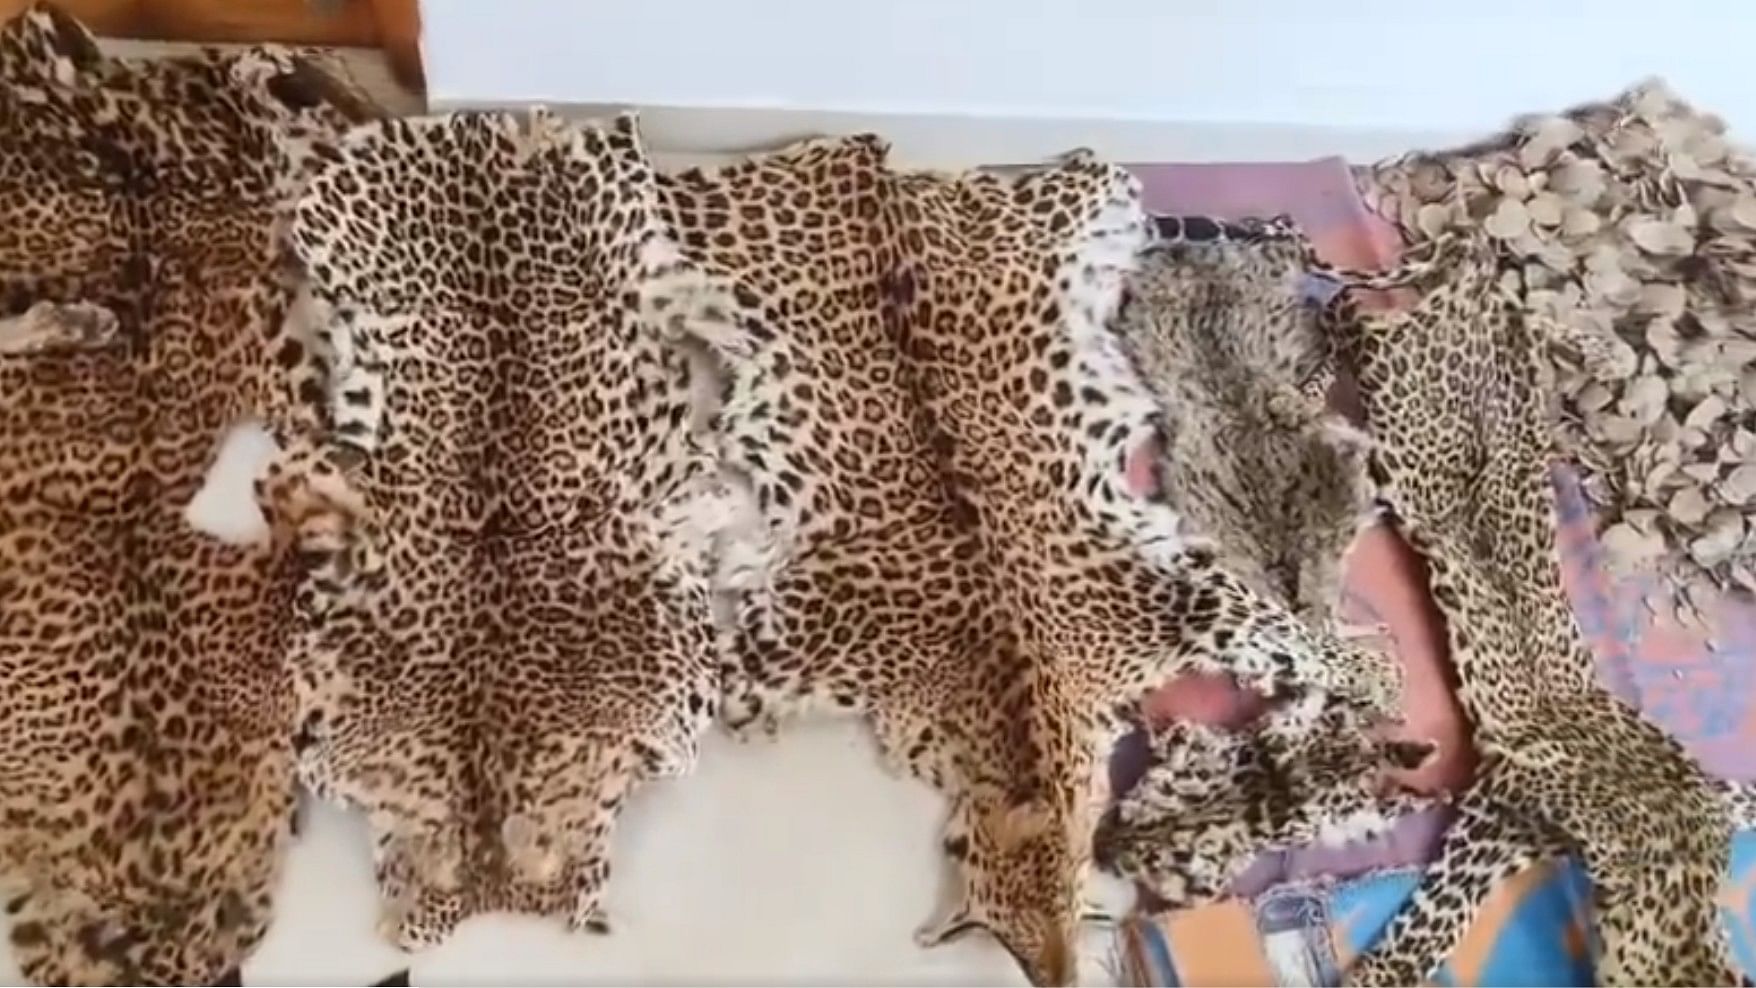 <div class="paragraphs"><p>Leopard and other cat skins seized from the smugglers.</p></div>